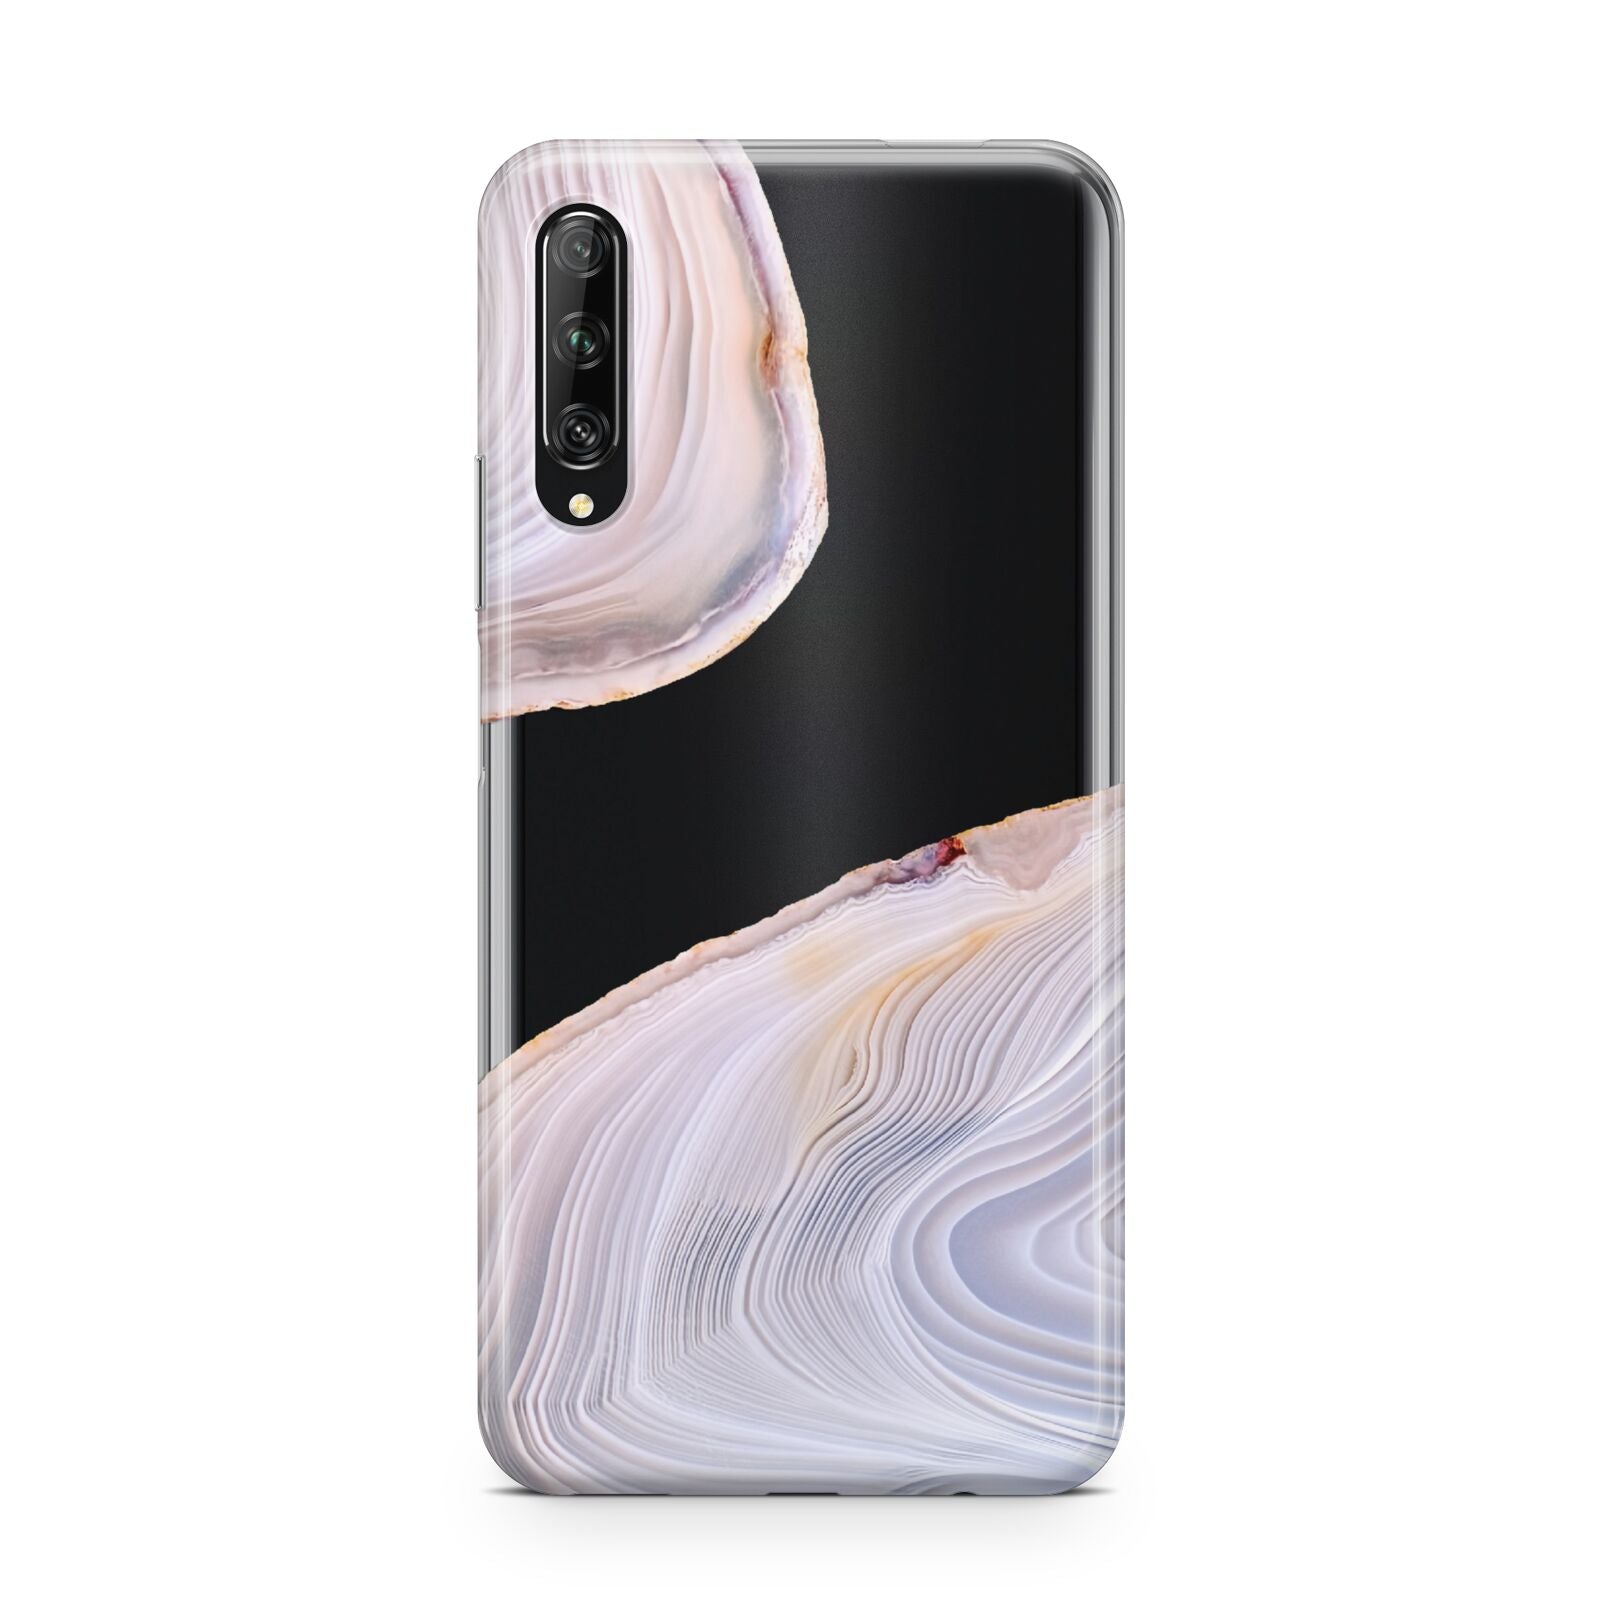 Agate Pale Pink and Blue Huawei P Smart Pro 2019